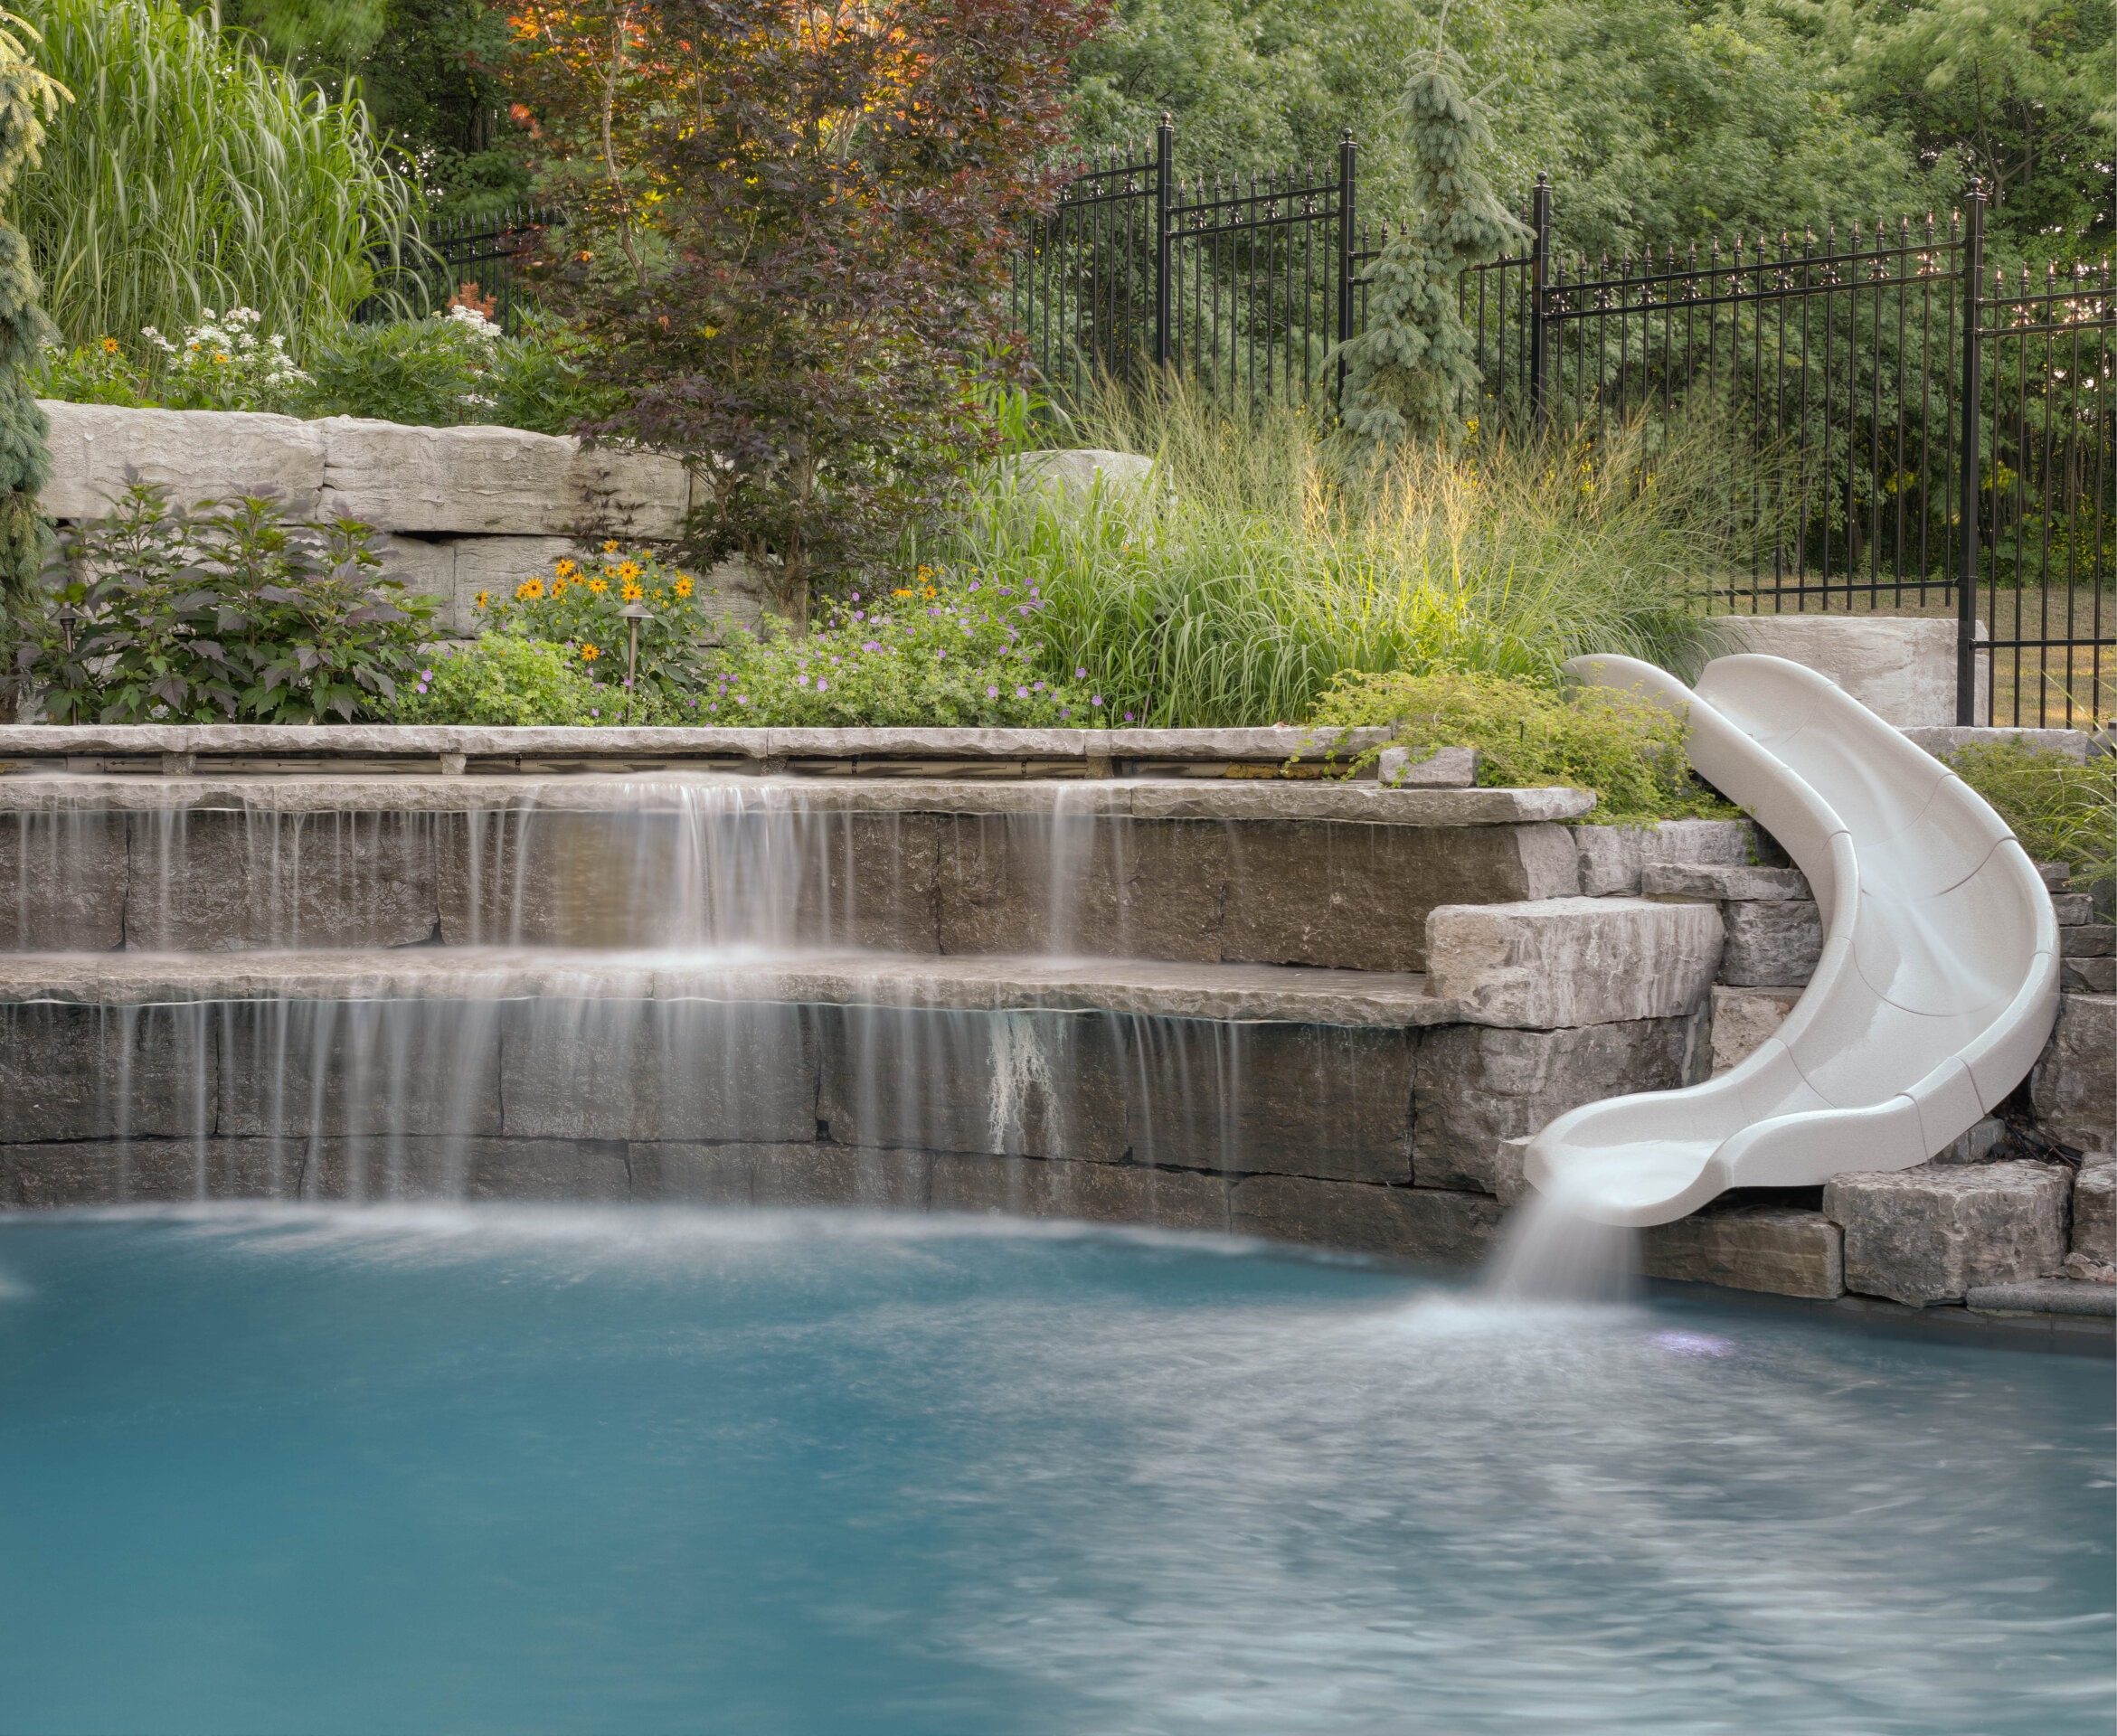 This image features a serene backyard with a swimming pool that includes a water slide and waterfall, surrounded by landscaped garden and a metal fence.